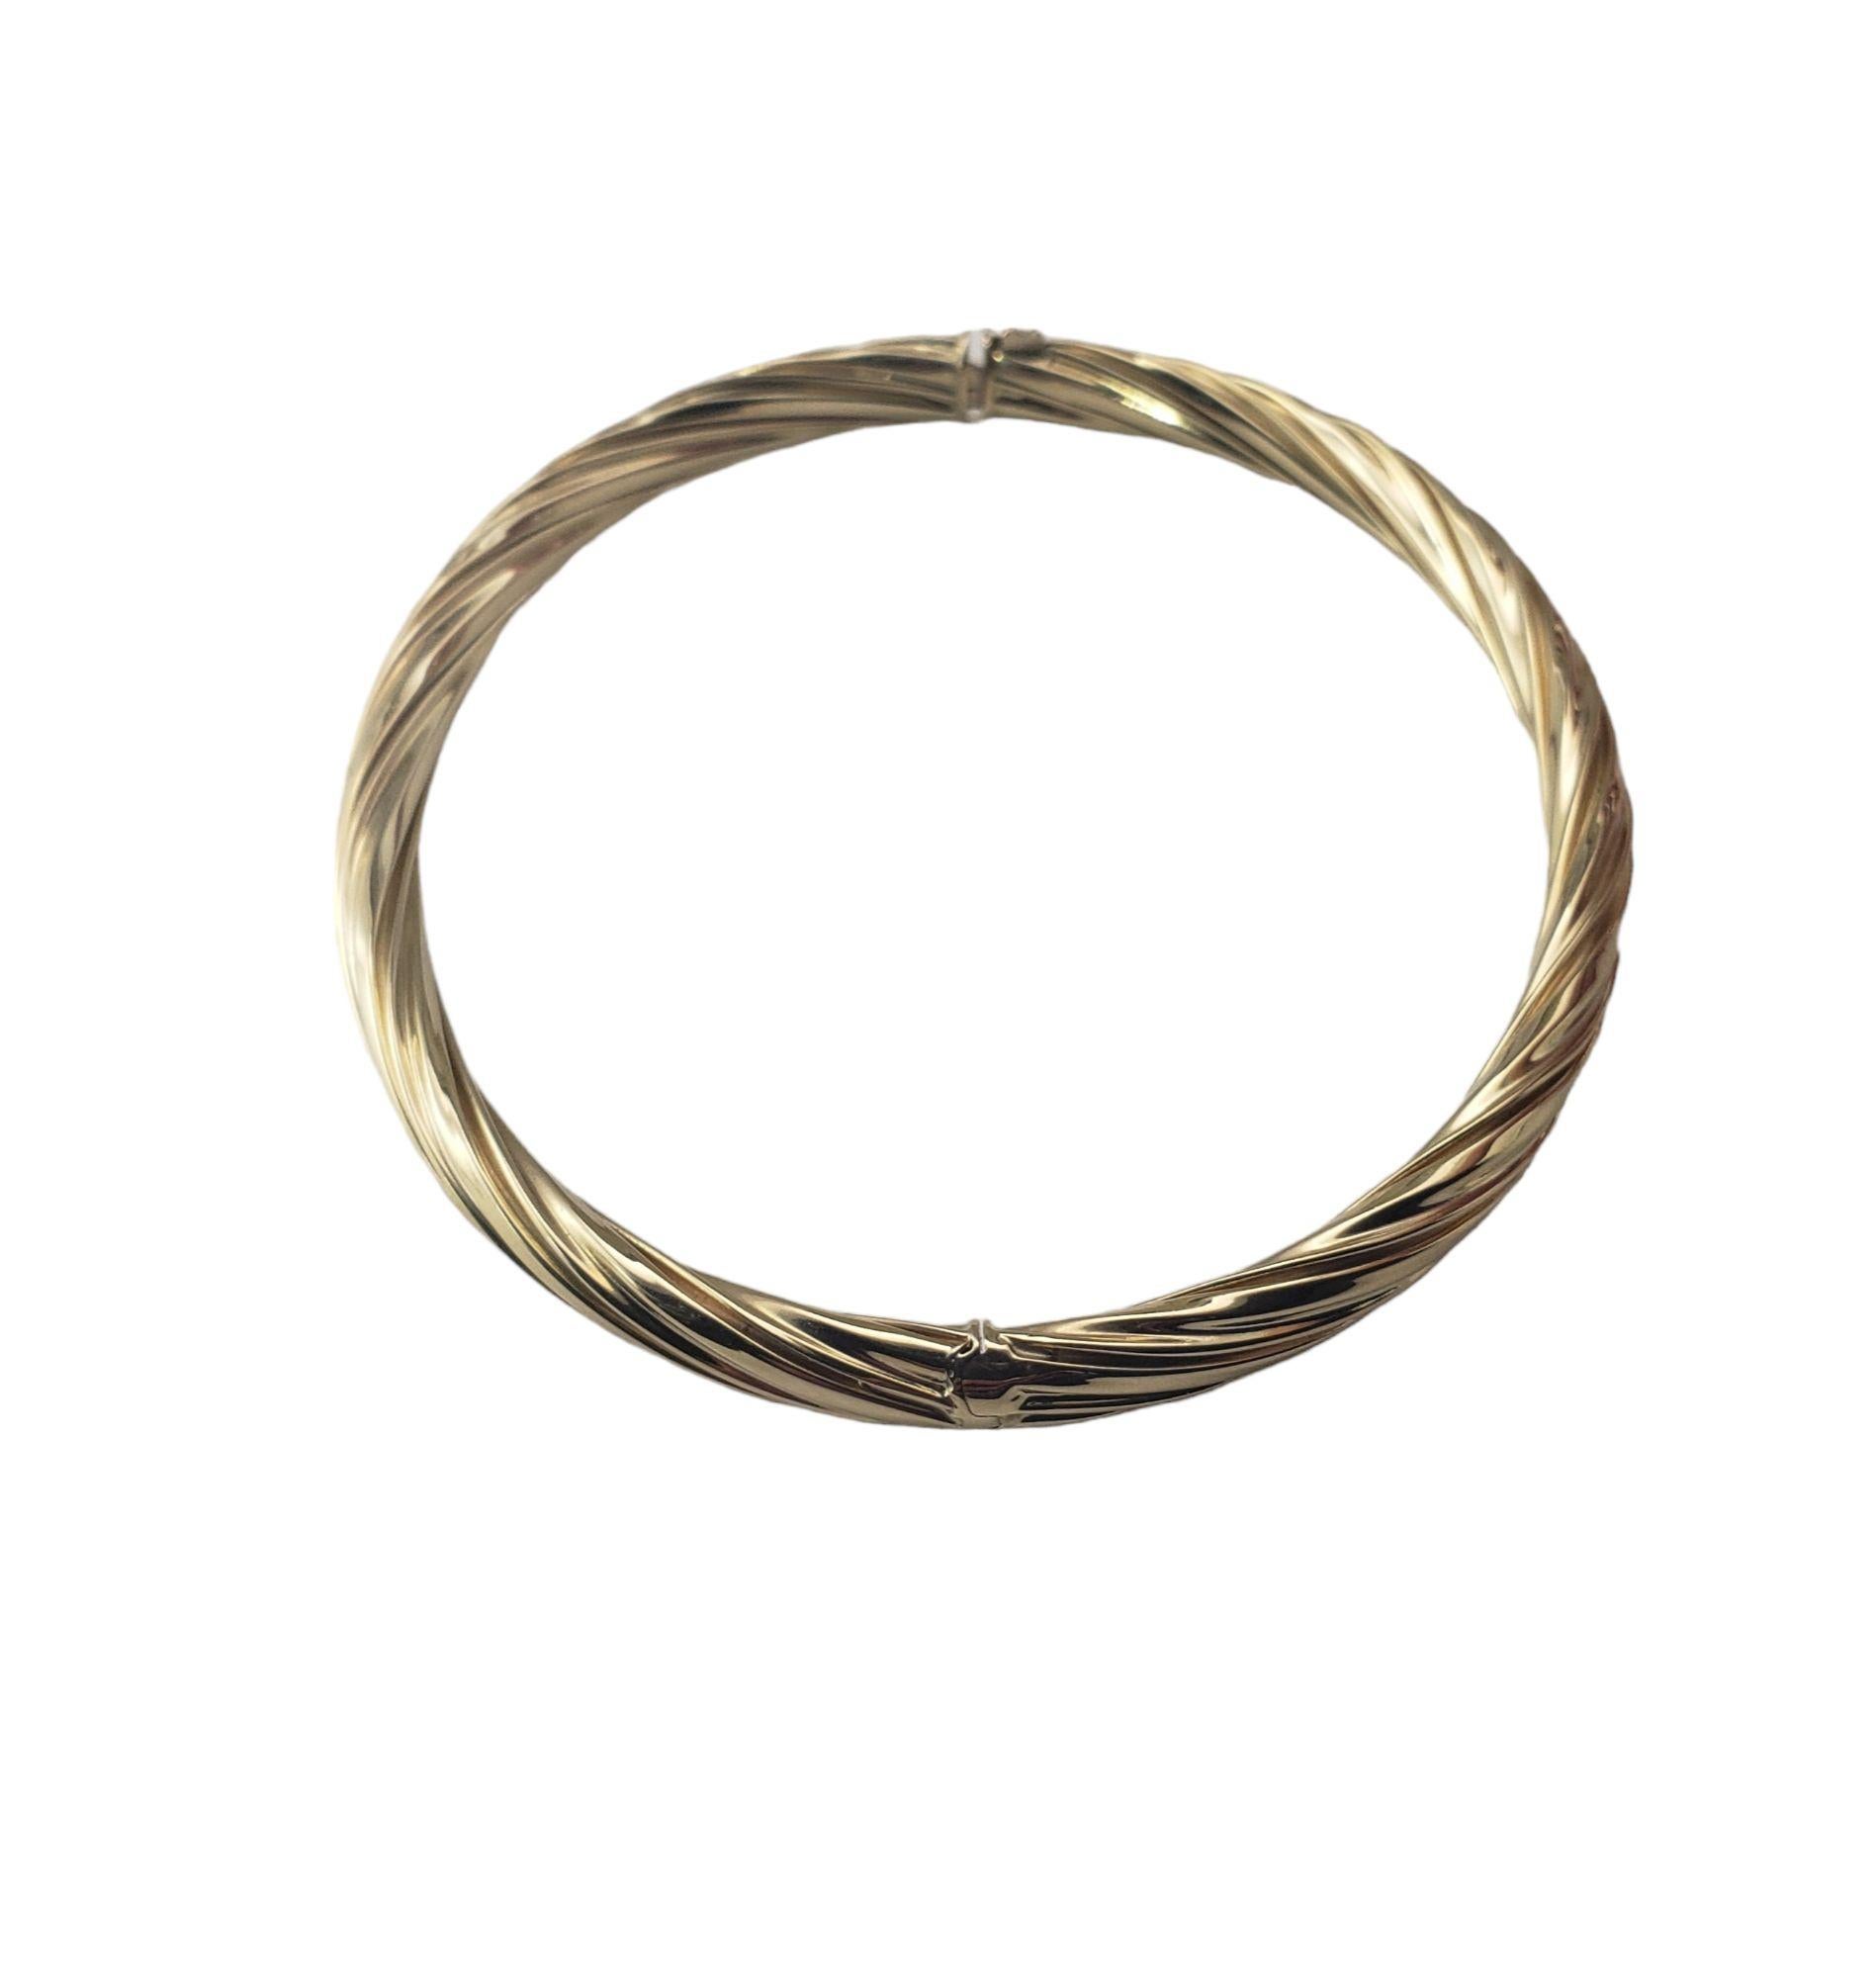 Vintage 14 Karat Yellow Gold Bangle Bracelet-

This lovely bangle bracelet is crafted in beautifully detailed 14K yellow gold. Width: 6 mm.

Size: 7 inches 
     
Weight: 9.4 gr./ 6.1 dwt.

Stamped: 14K

Very good condition, professionally